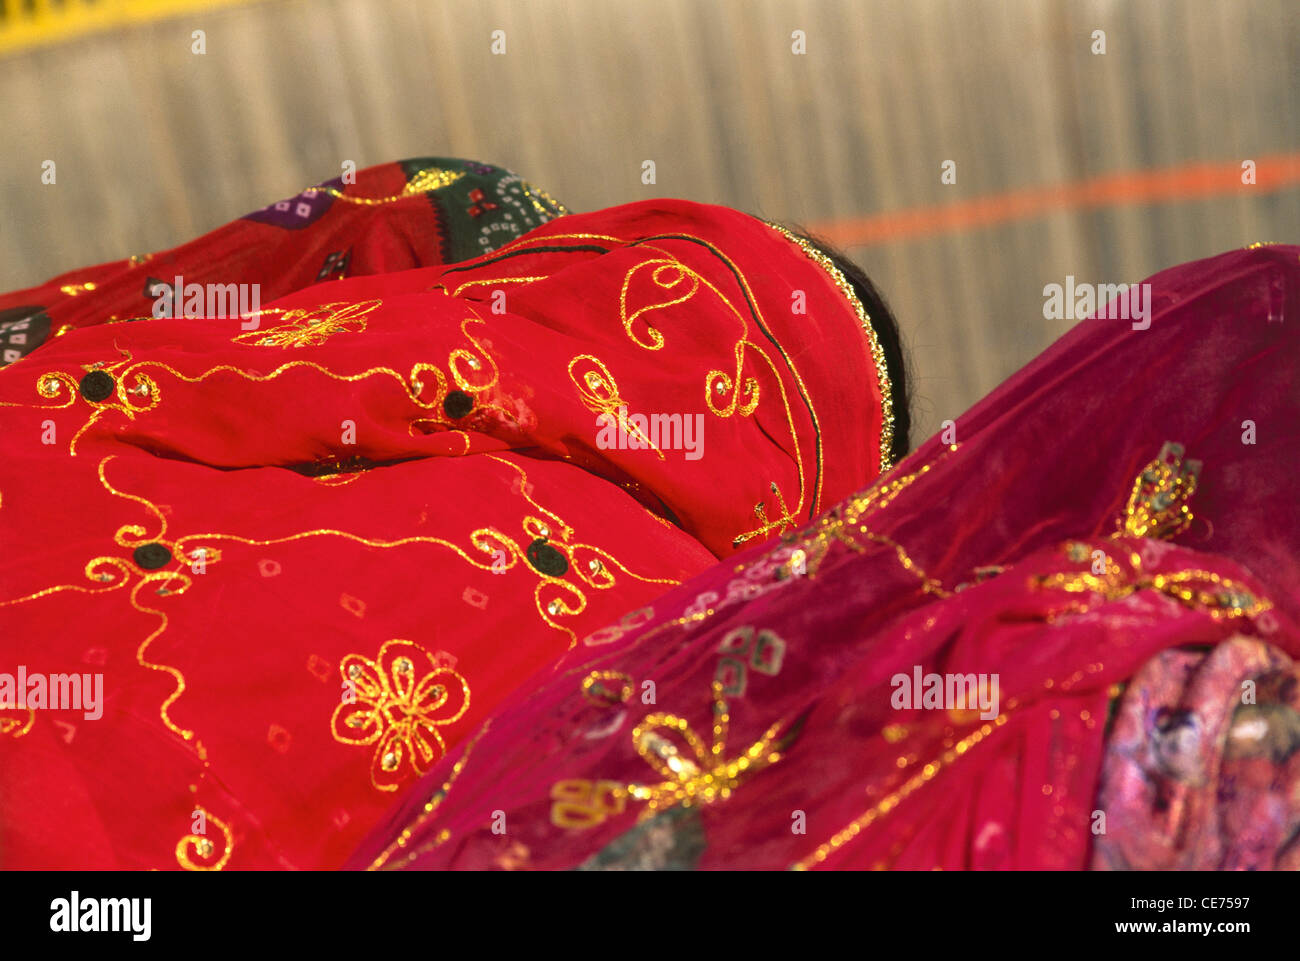 MMN 82278 : three indian women in red sarees with gold embroidery at pushkar fair rajasthan india Stock Photo